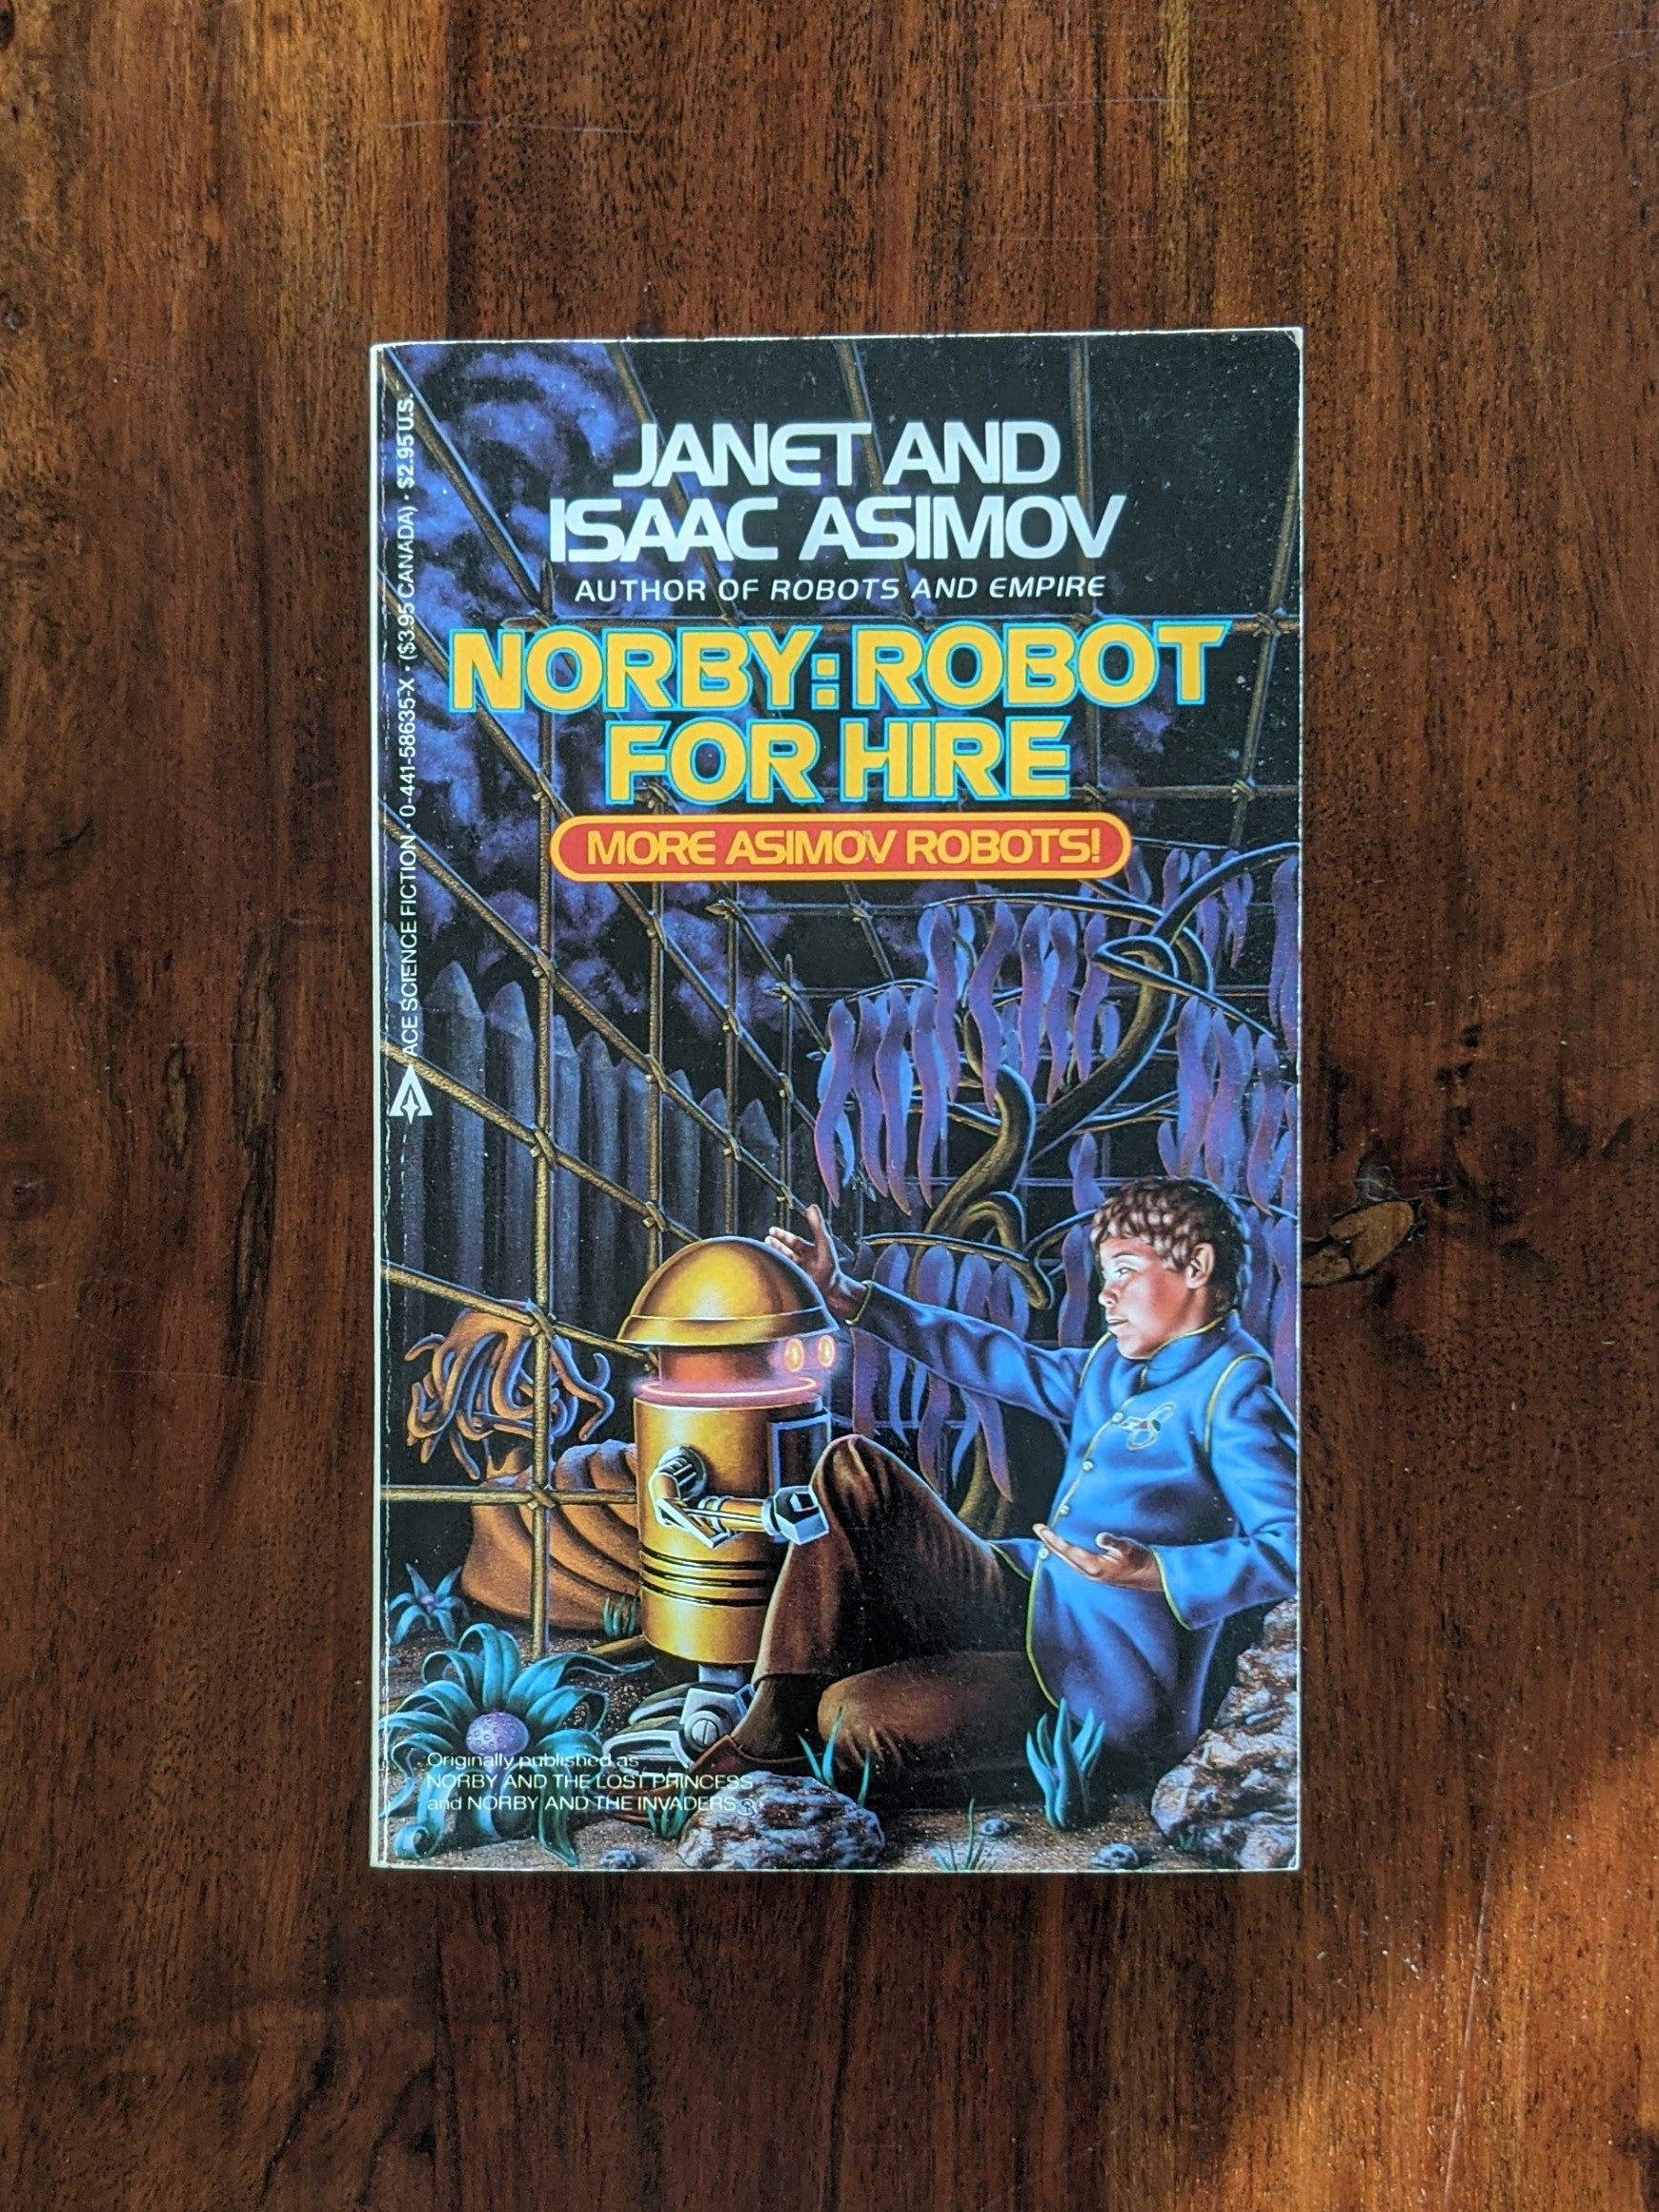 Robot for Hire by Janet and Asimov – Chapterhouse Books